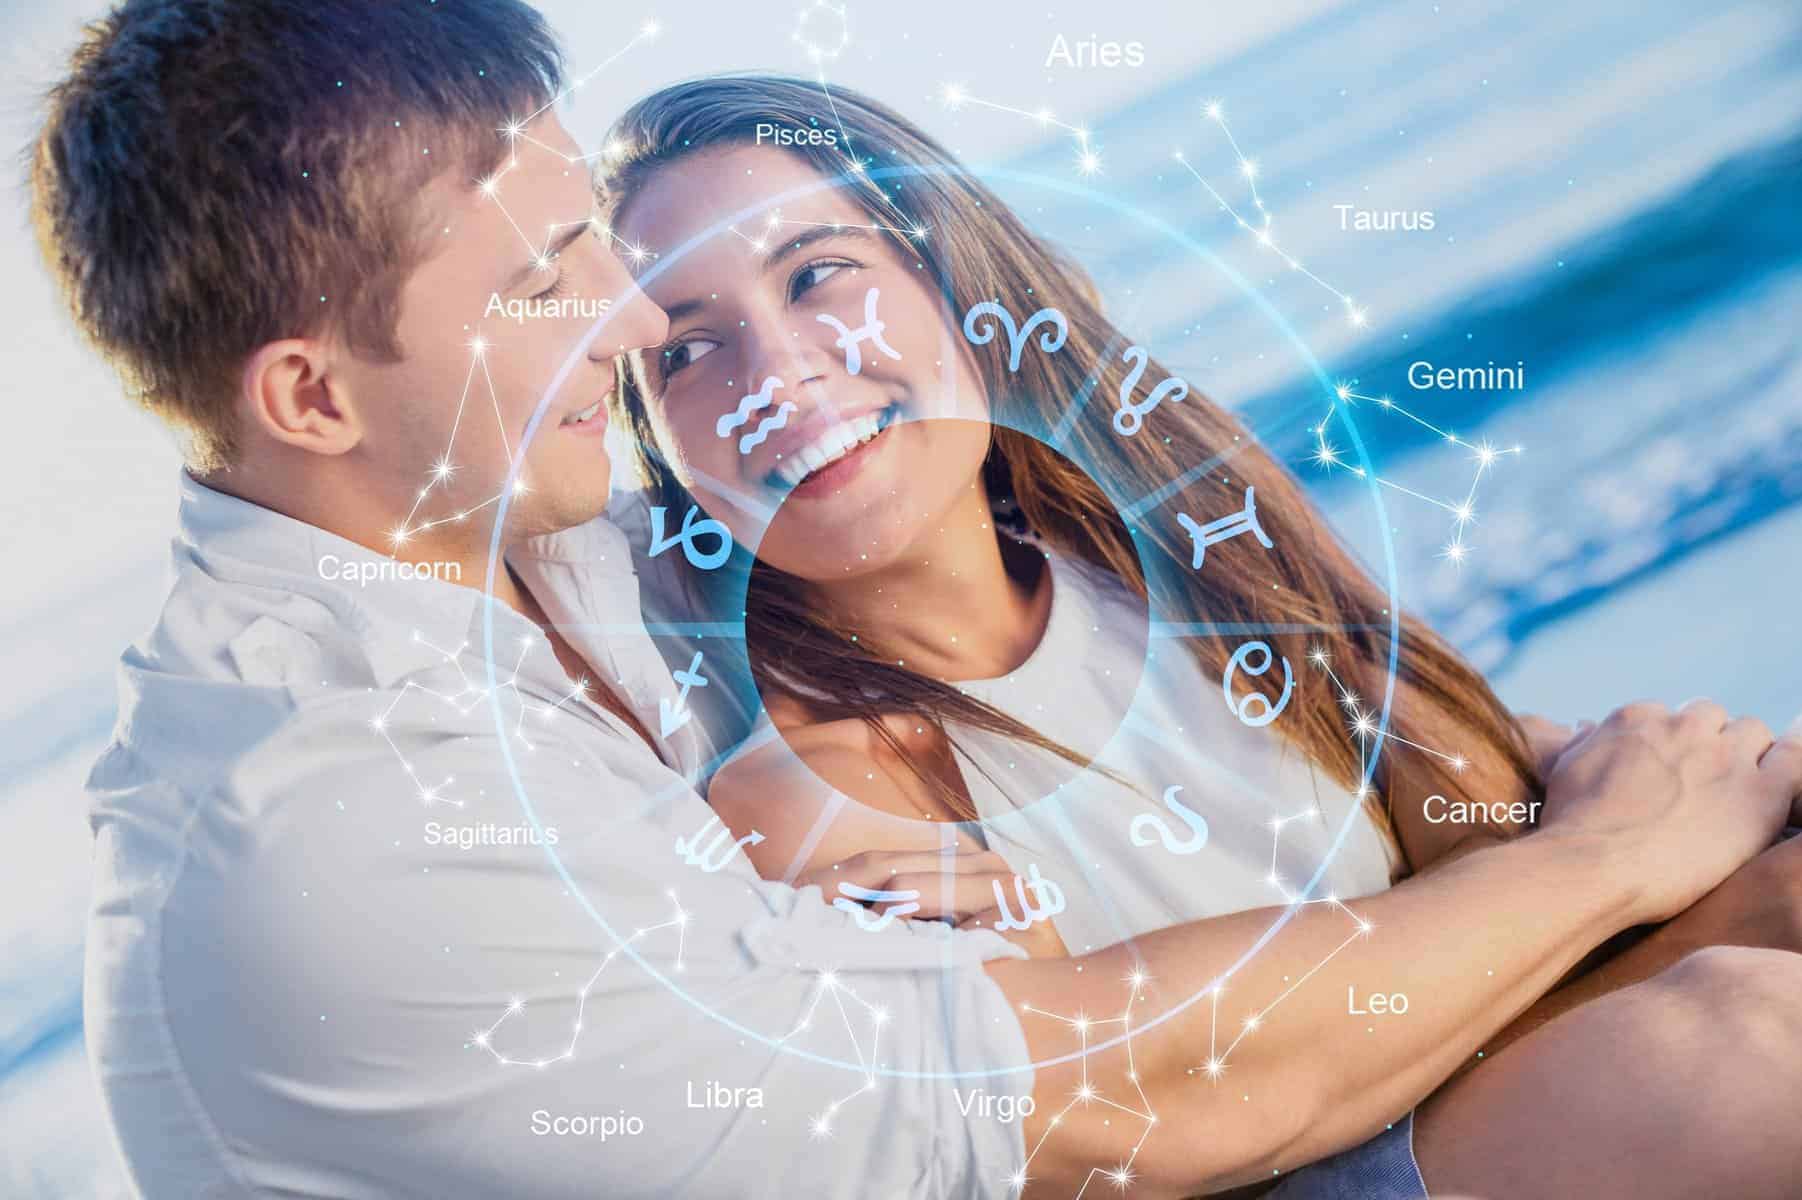 A man and a woman embracing each other in front of zodiac signs